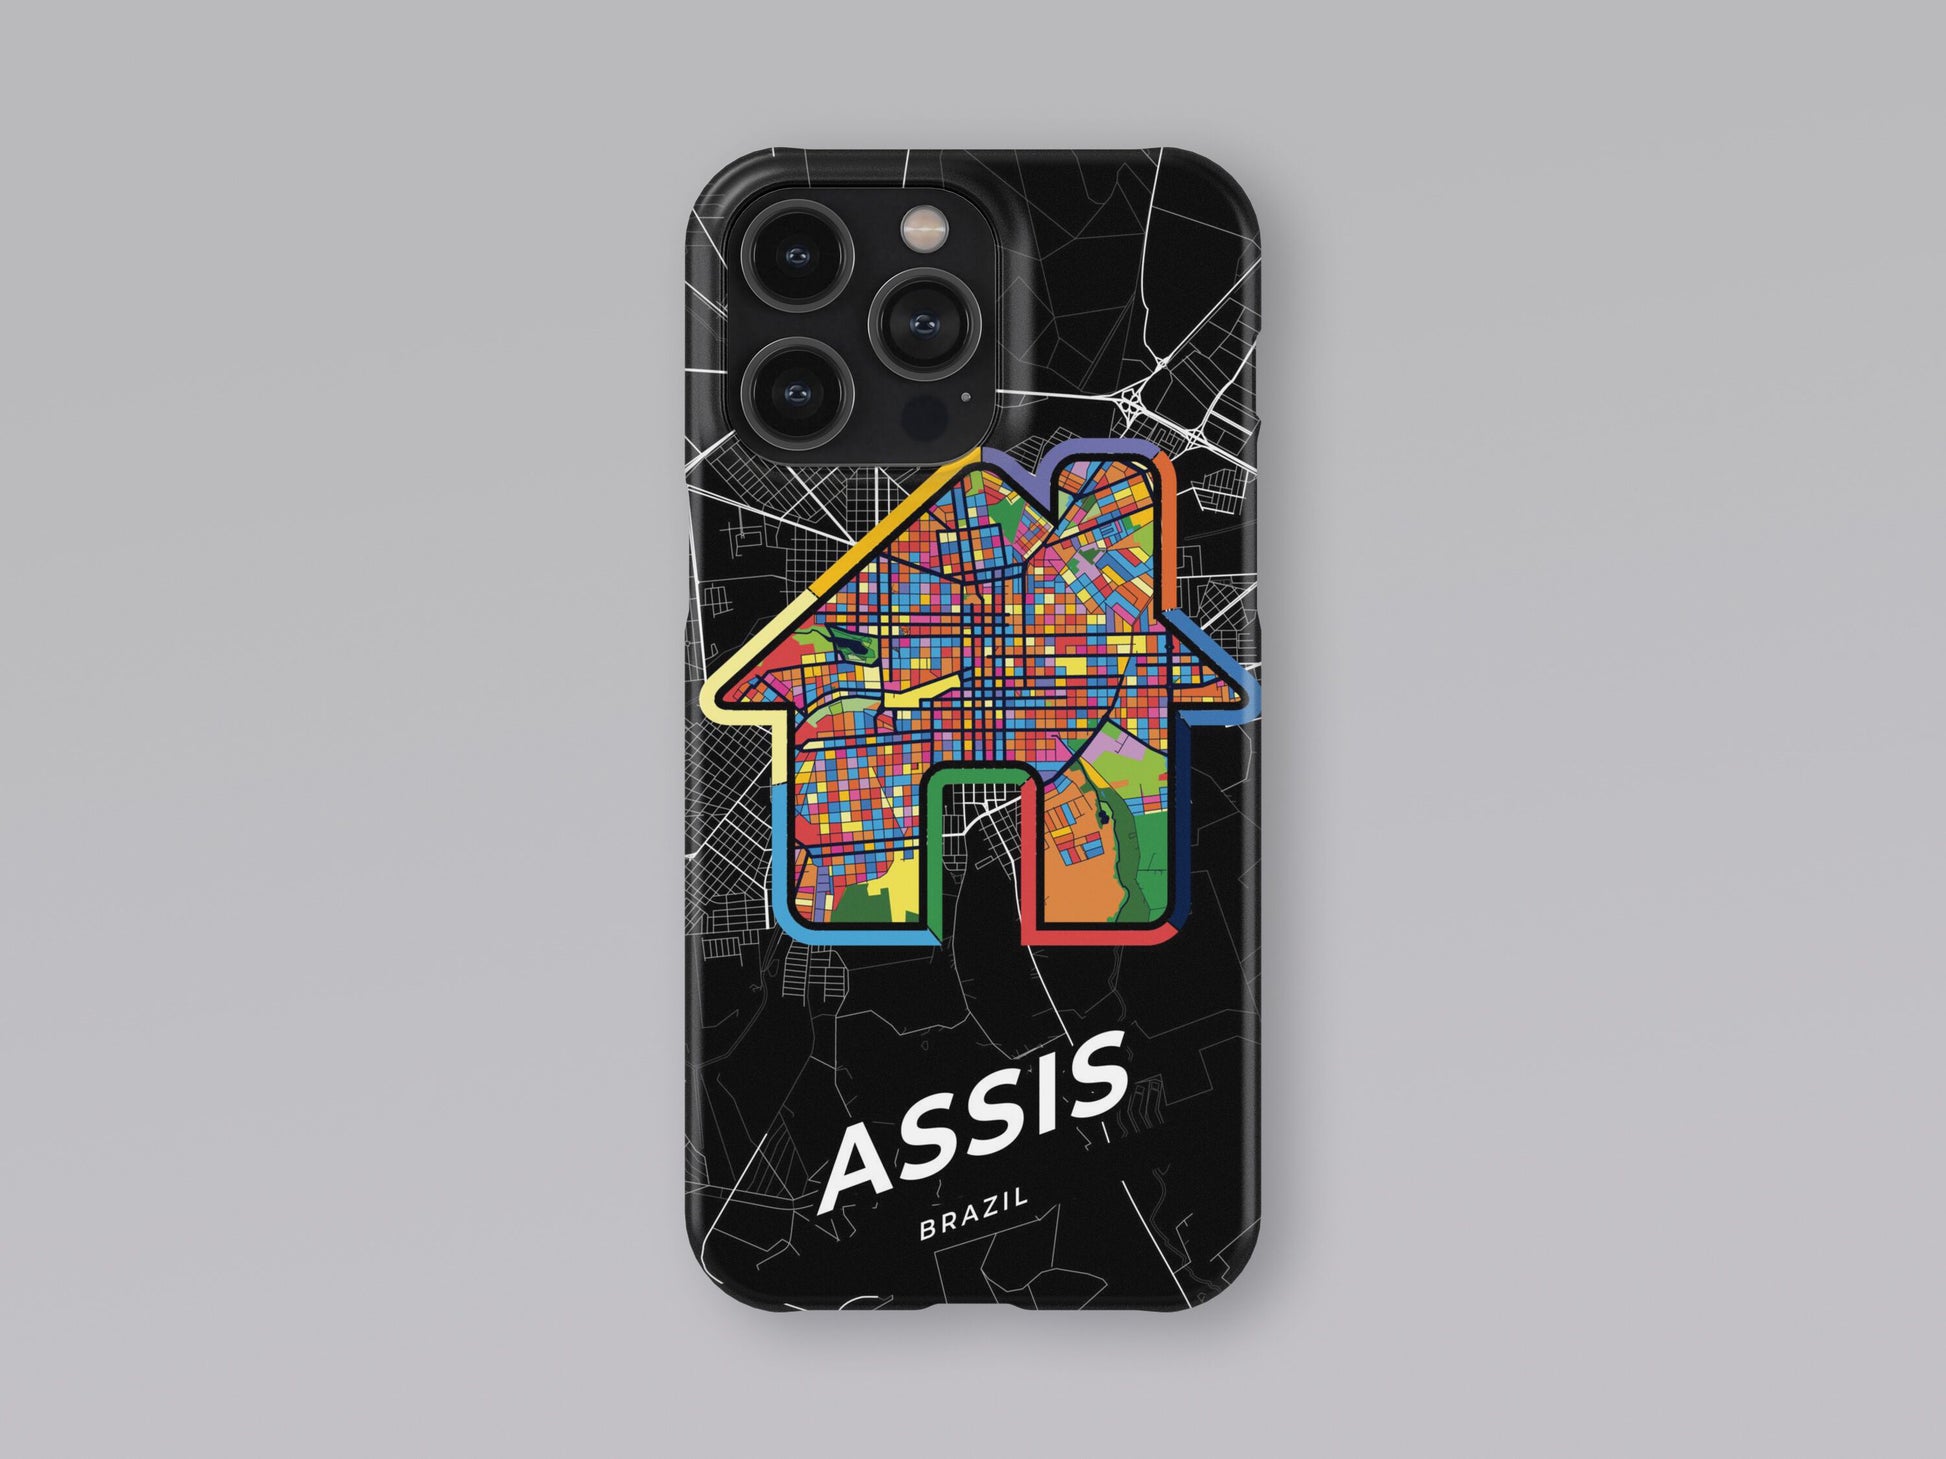 Assis Brazil slim phone case with colorful icon. Birthday, wedding or housewarming gift. Couple match cases. 3